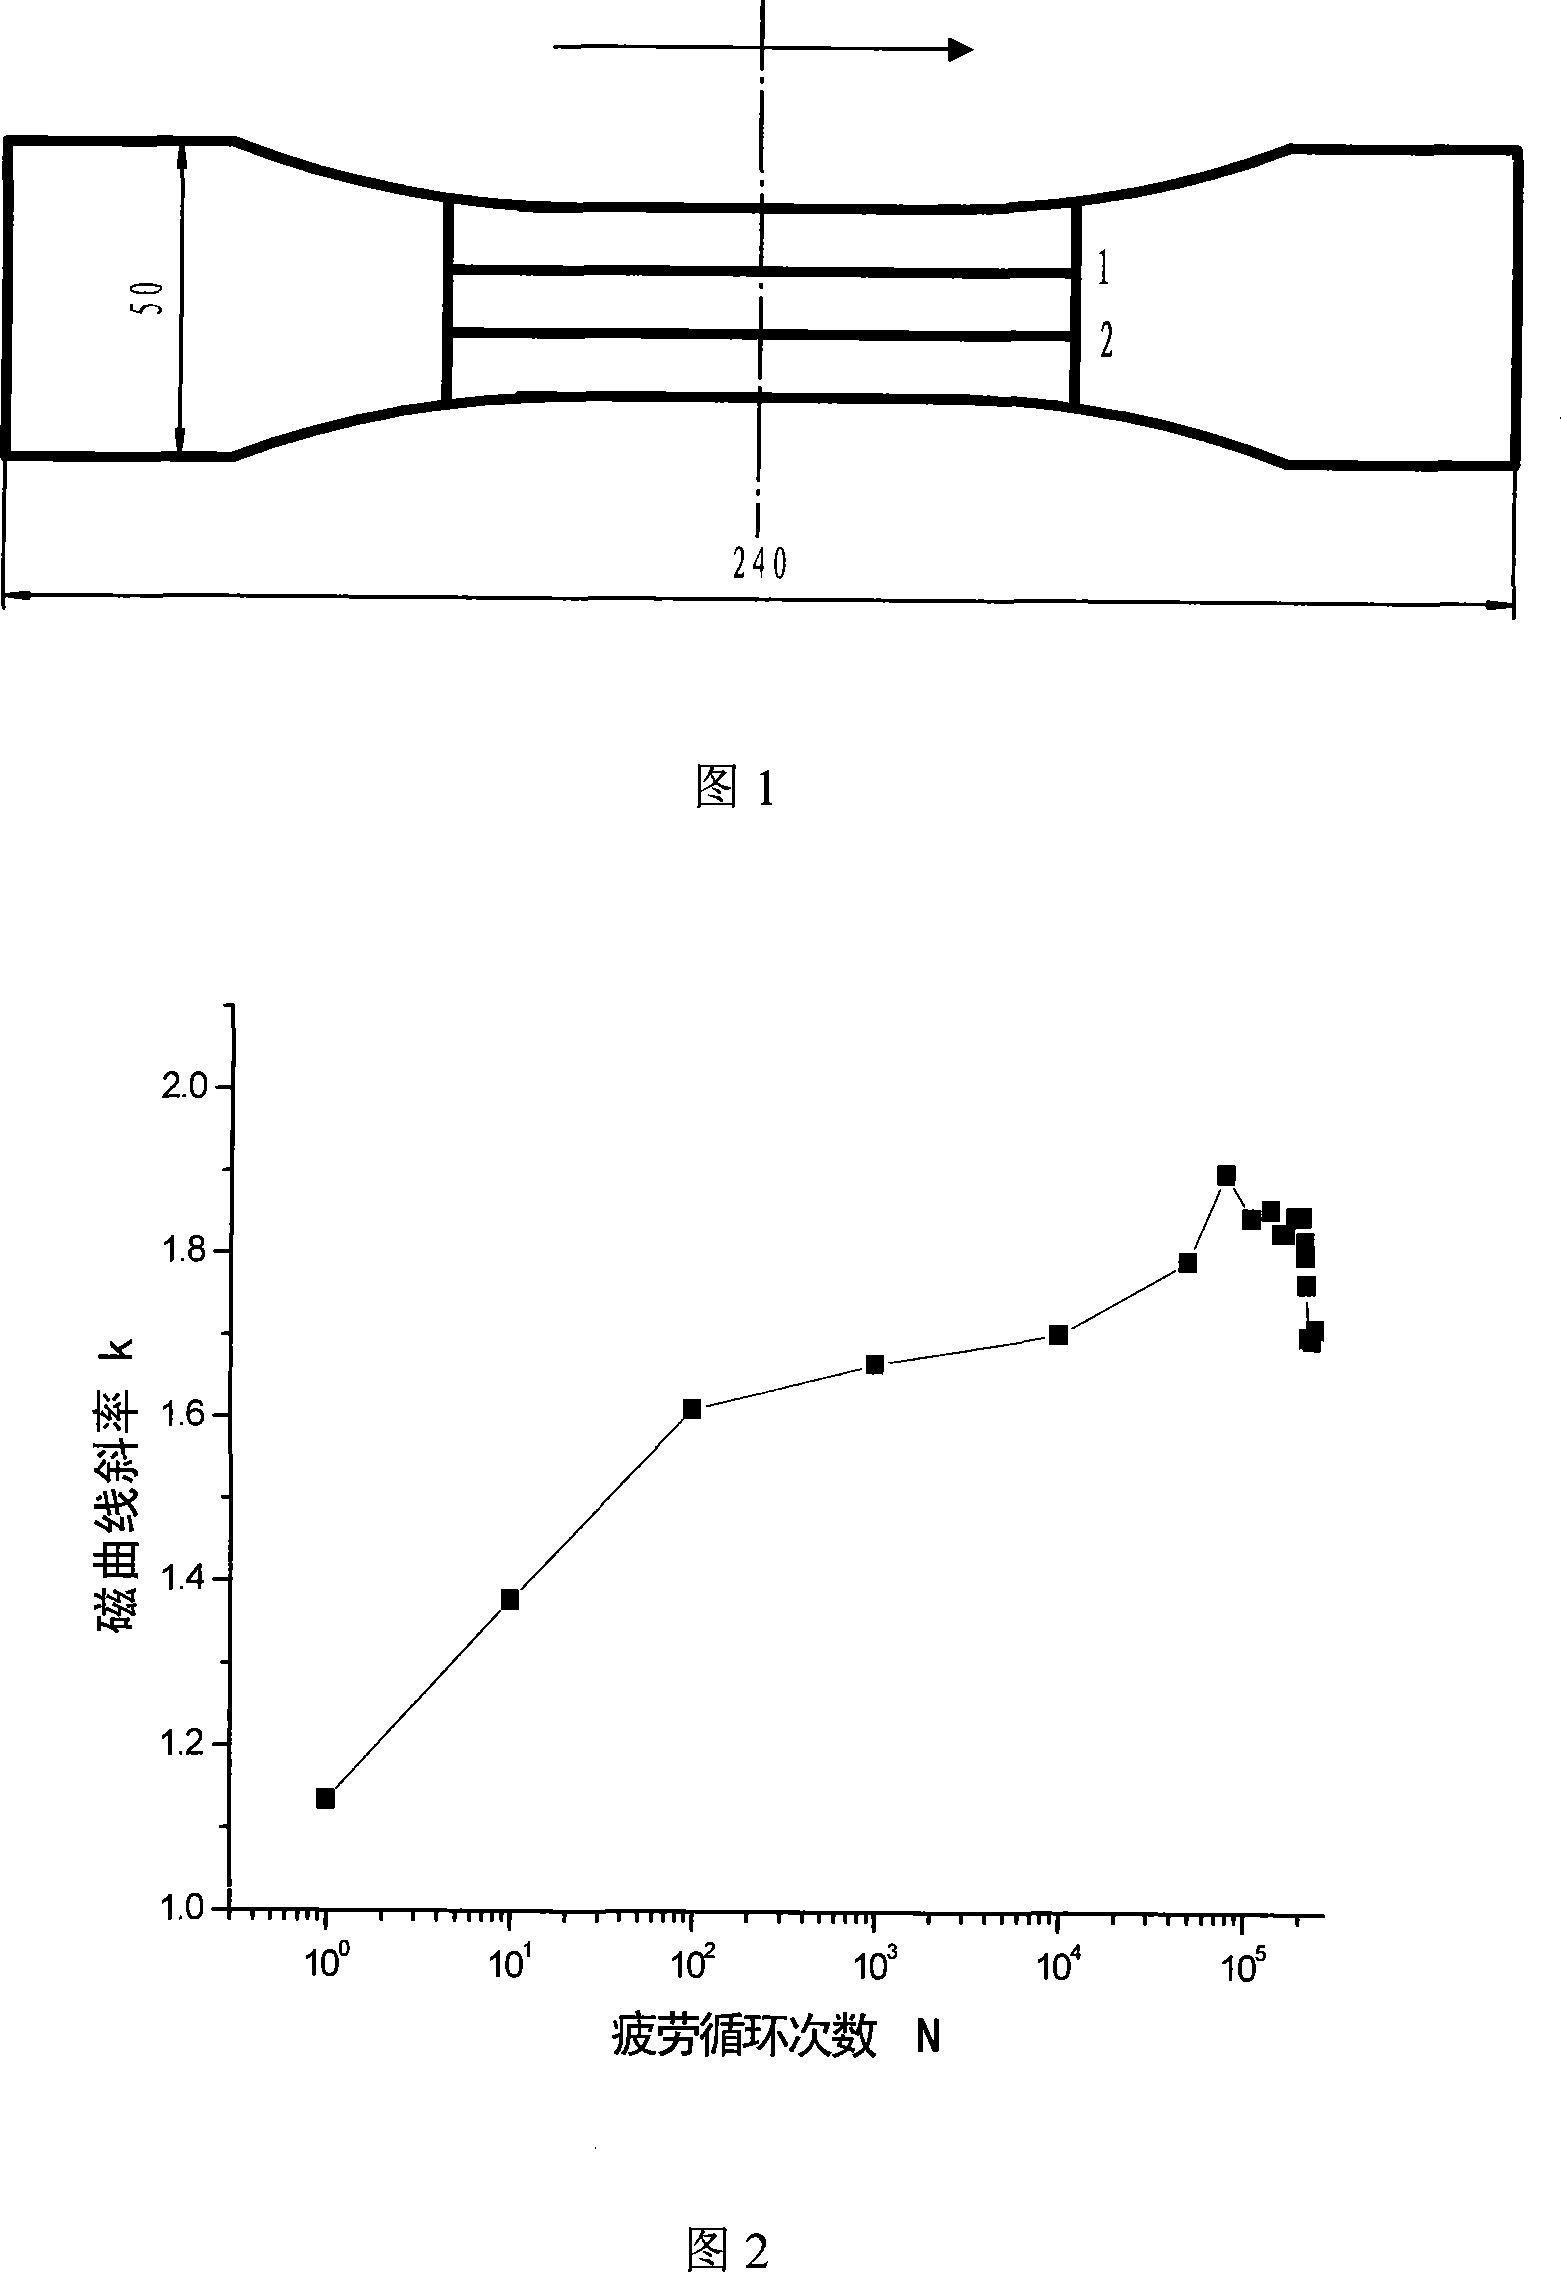 Method for monitoring fatigue damage using ferromagnetic materials surface stray magnetic field signal